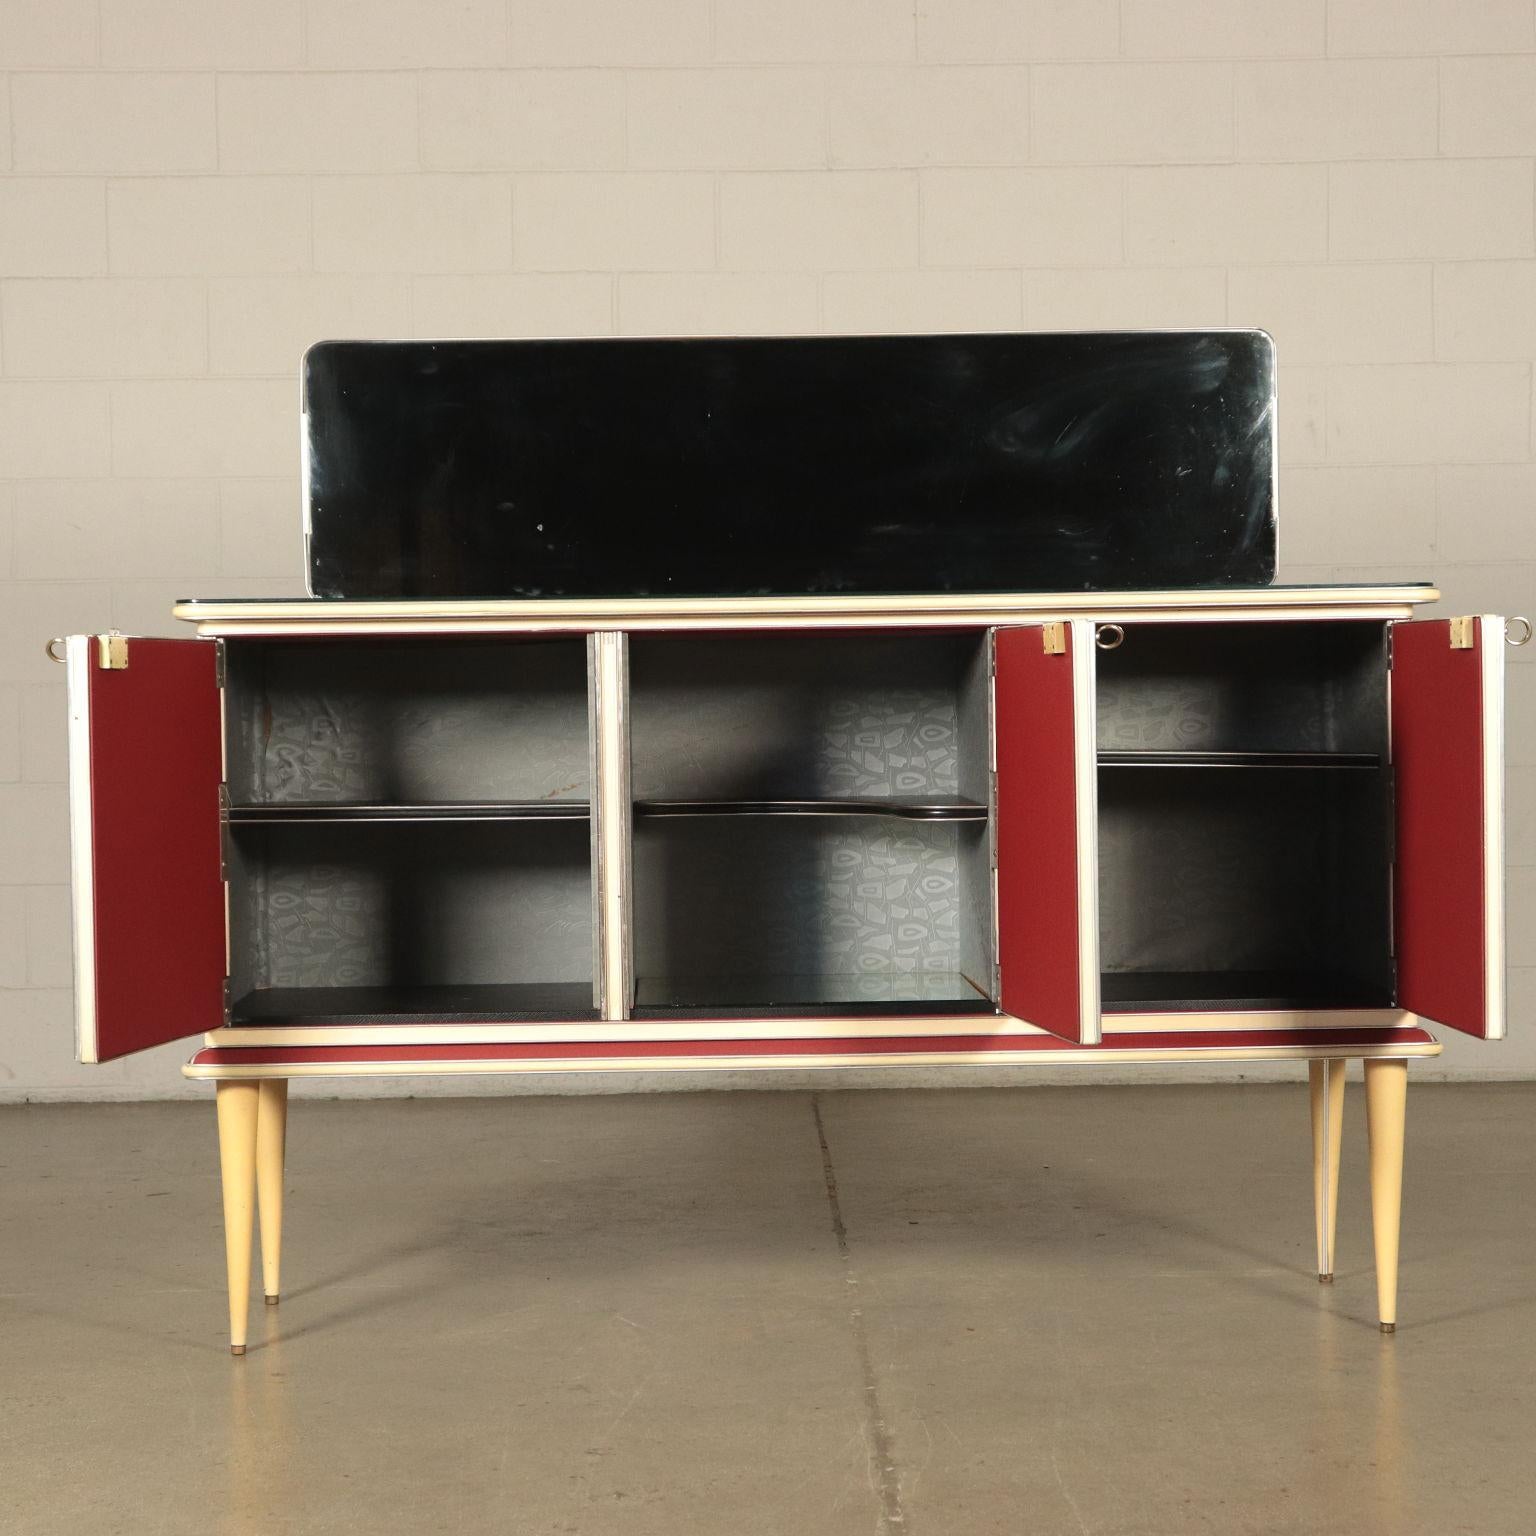 Mid-Century Modern Buffet, Wood and Glass, Italy 1950s-1960s Umberto Mascagni